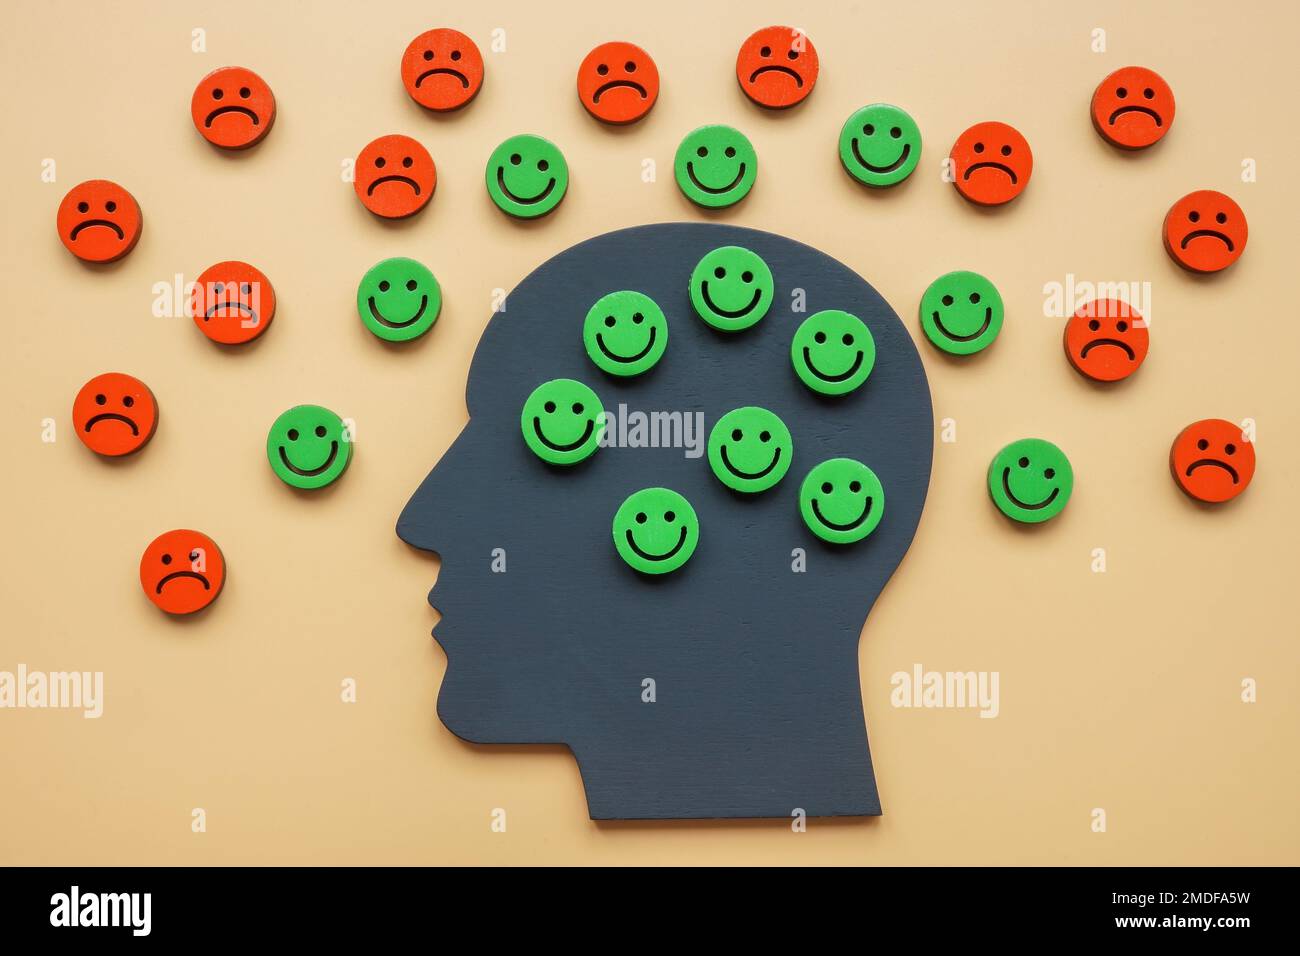 A head with happy emoticons and a sad around as a symbol of a positive attitude. Stock Photo